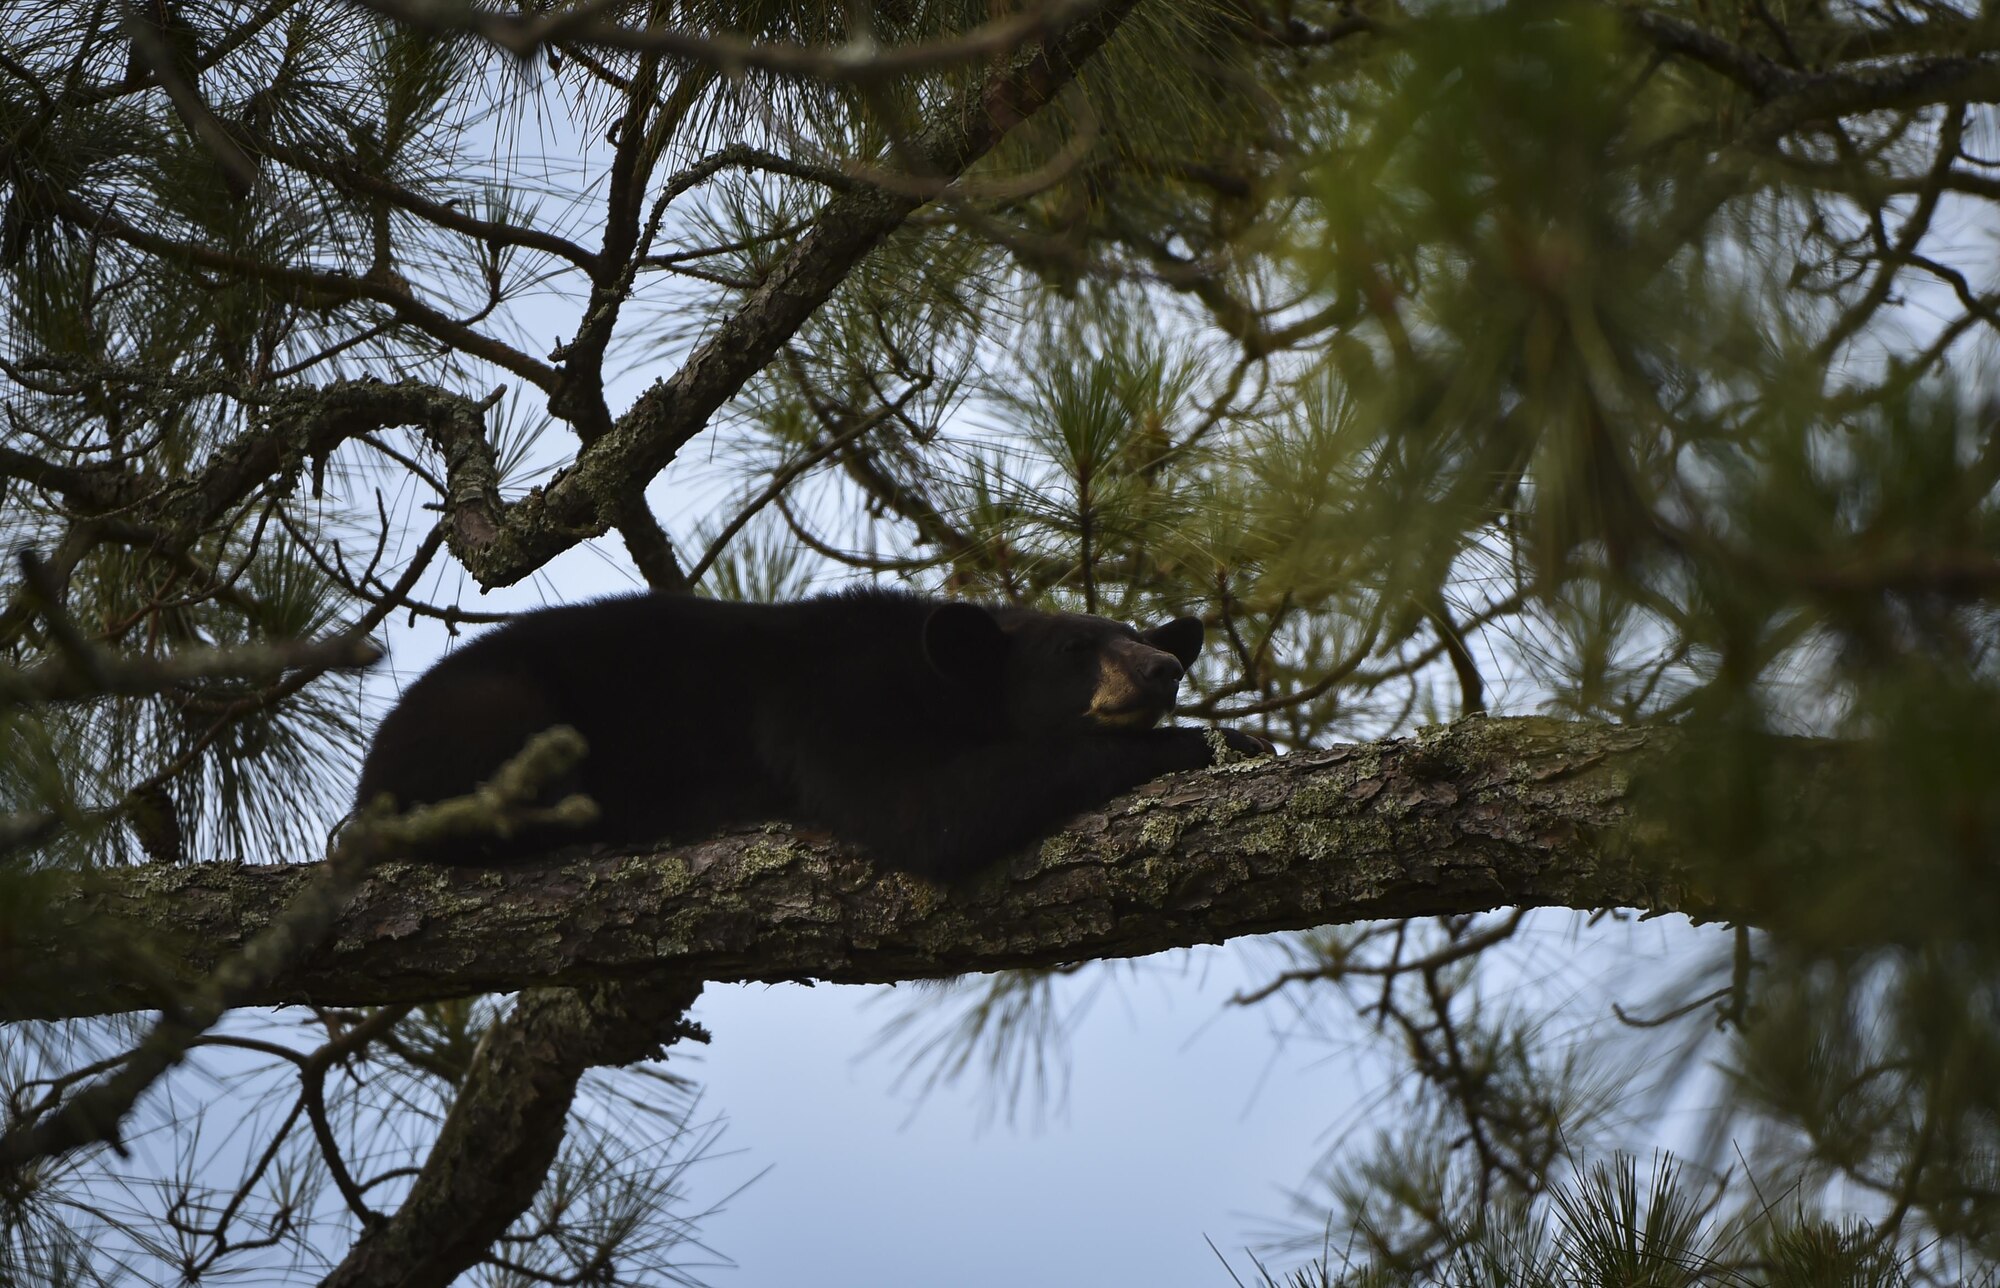 A black bear lays in a tree at the Soundside playground on Hurlburt Field, Fla., May 22, 2017. Florida Fish and Wildlife Conservation personnel have set out traps and encourage residents to clean and store their grills and trash cans in a secured compound such as a shed or covered enclosure. (U.S. Air Force photo by Airman 1st Class Joseph Pick)